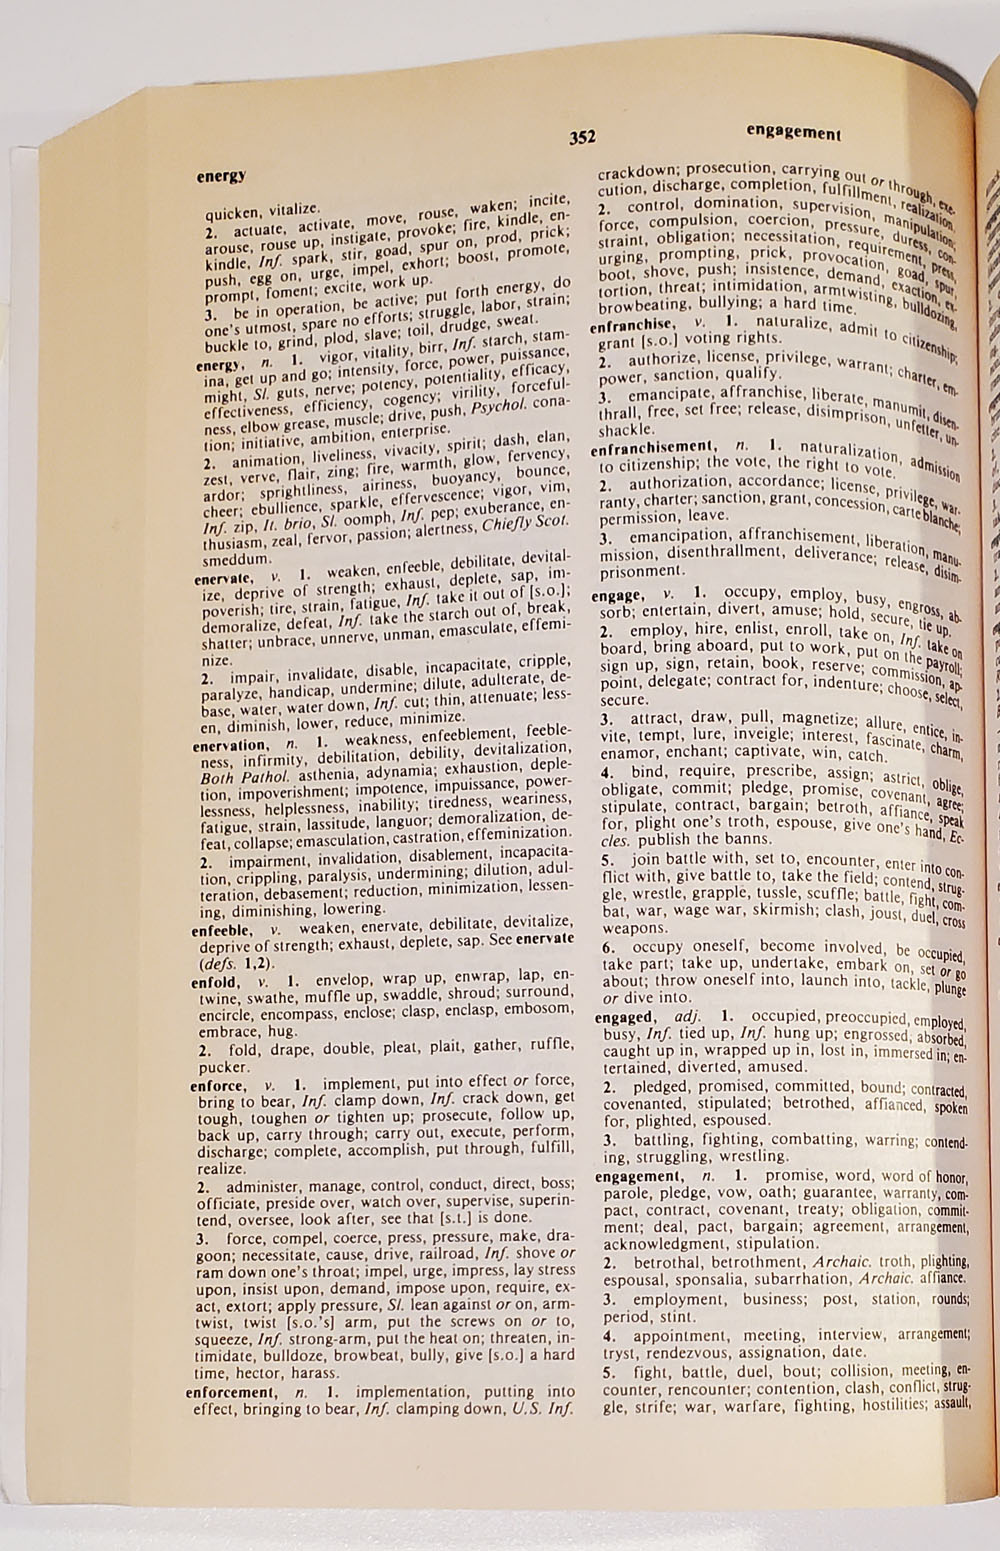 1986 thesaurus printed on wood pulp paper showing acid deterioration.